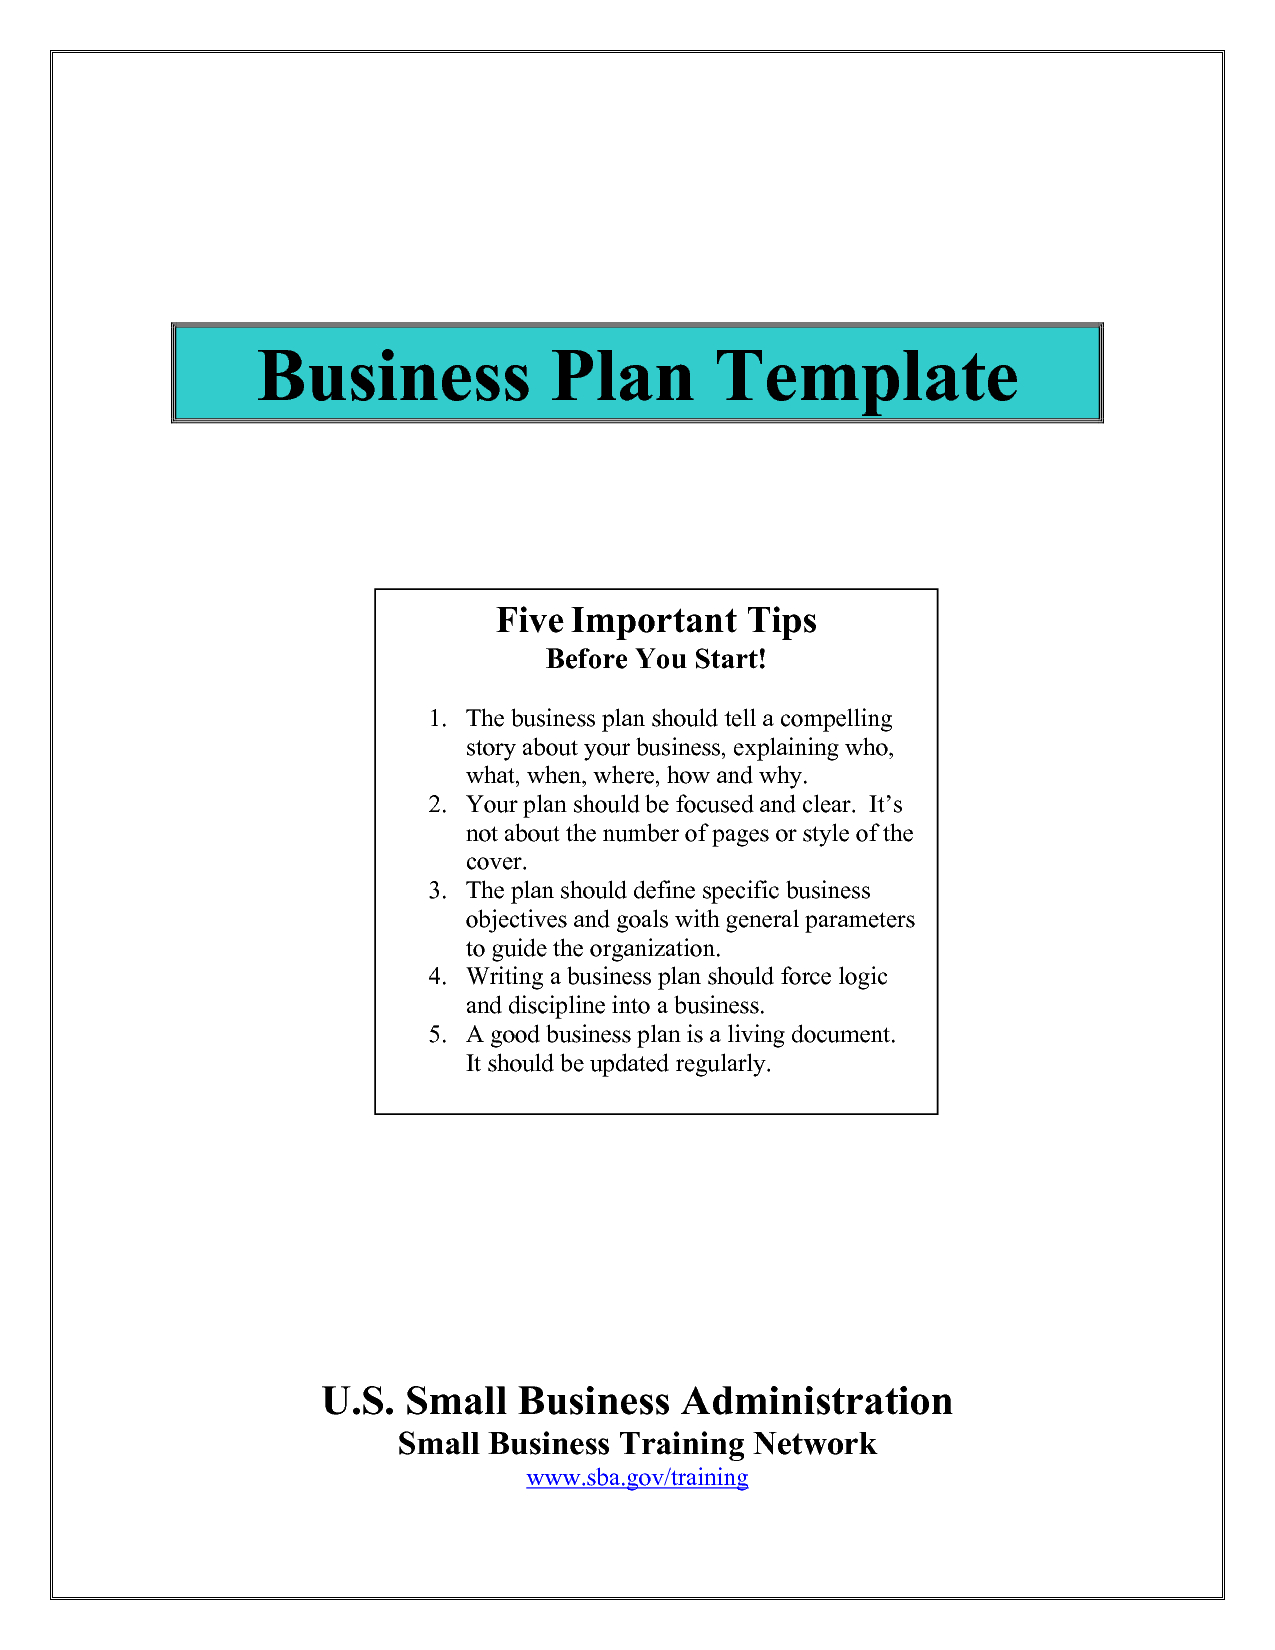 Business Plan Template Free Printable Small Word Document Pertaining To Business Plan Template Free Word Document